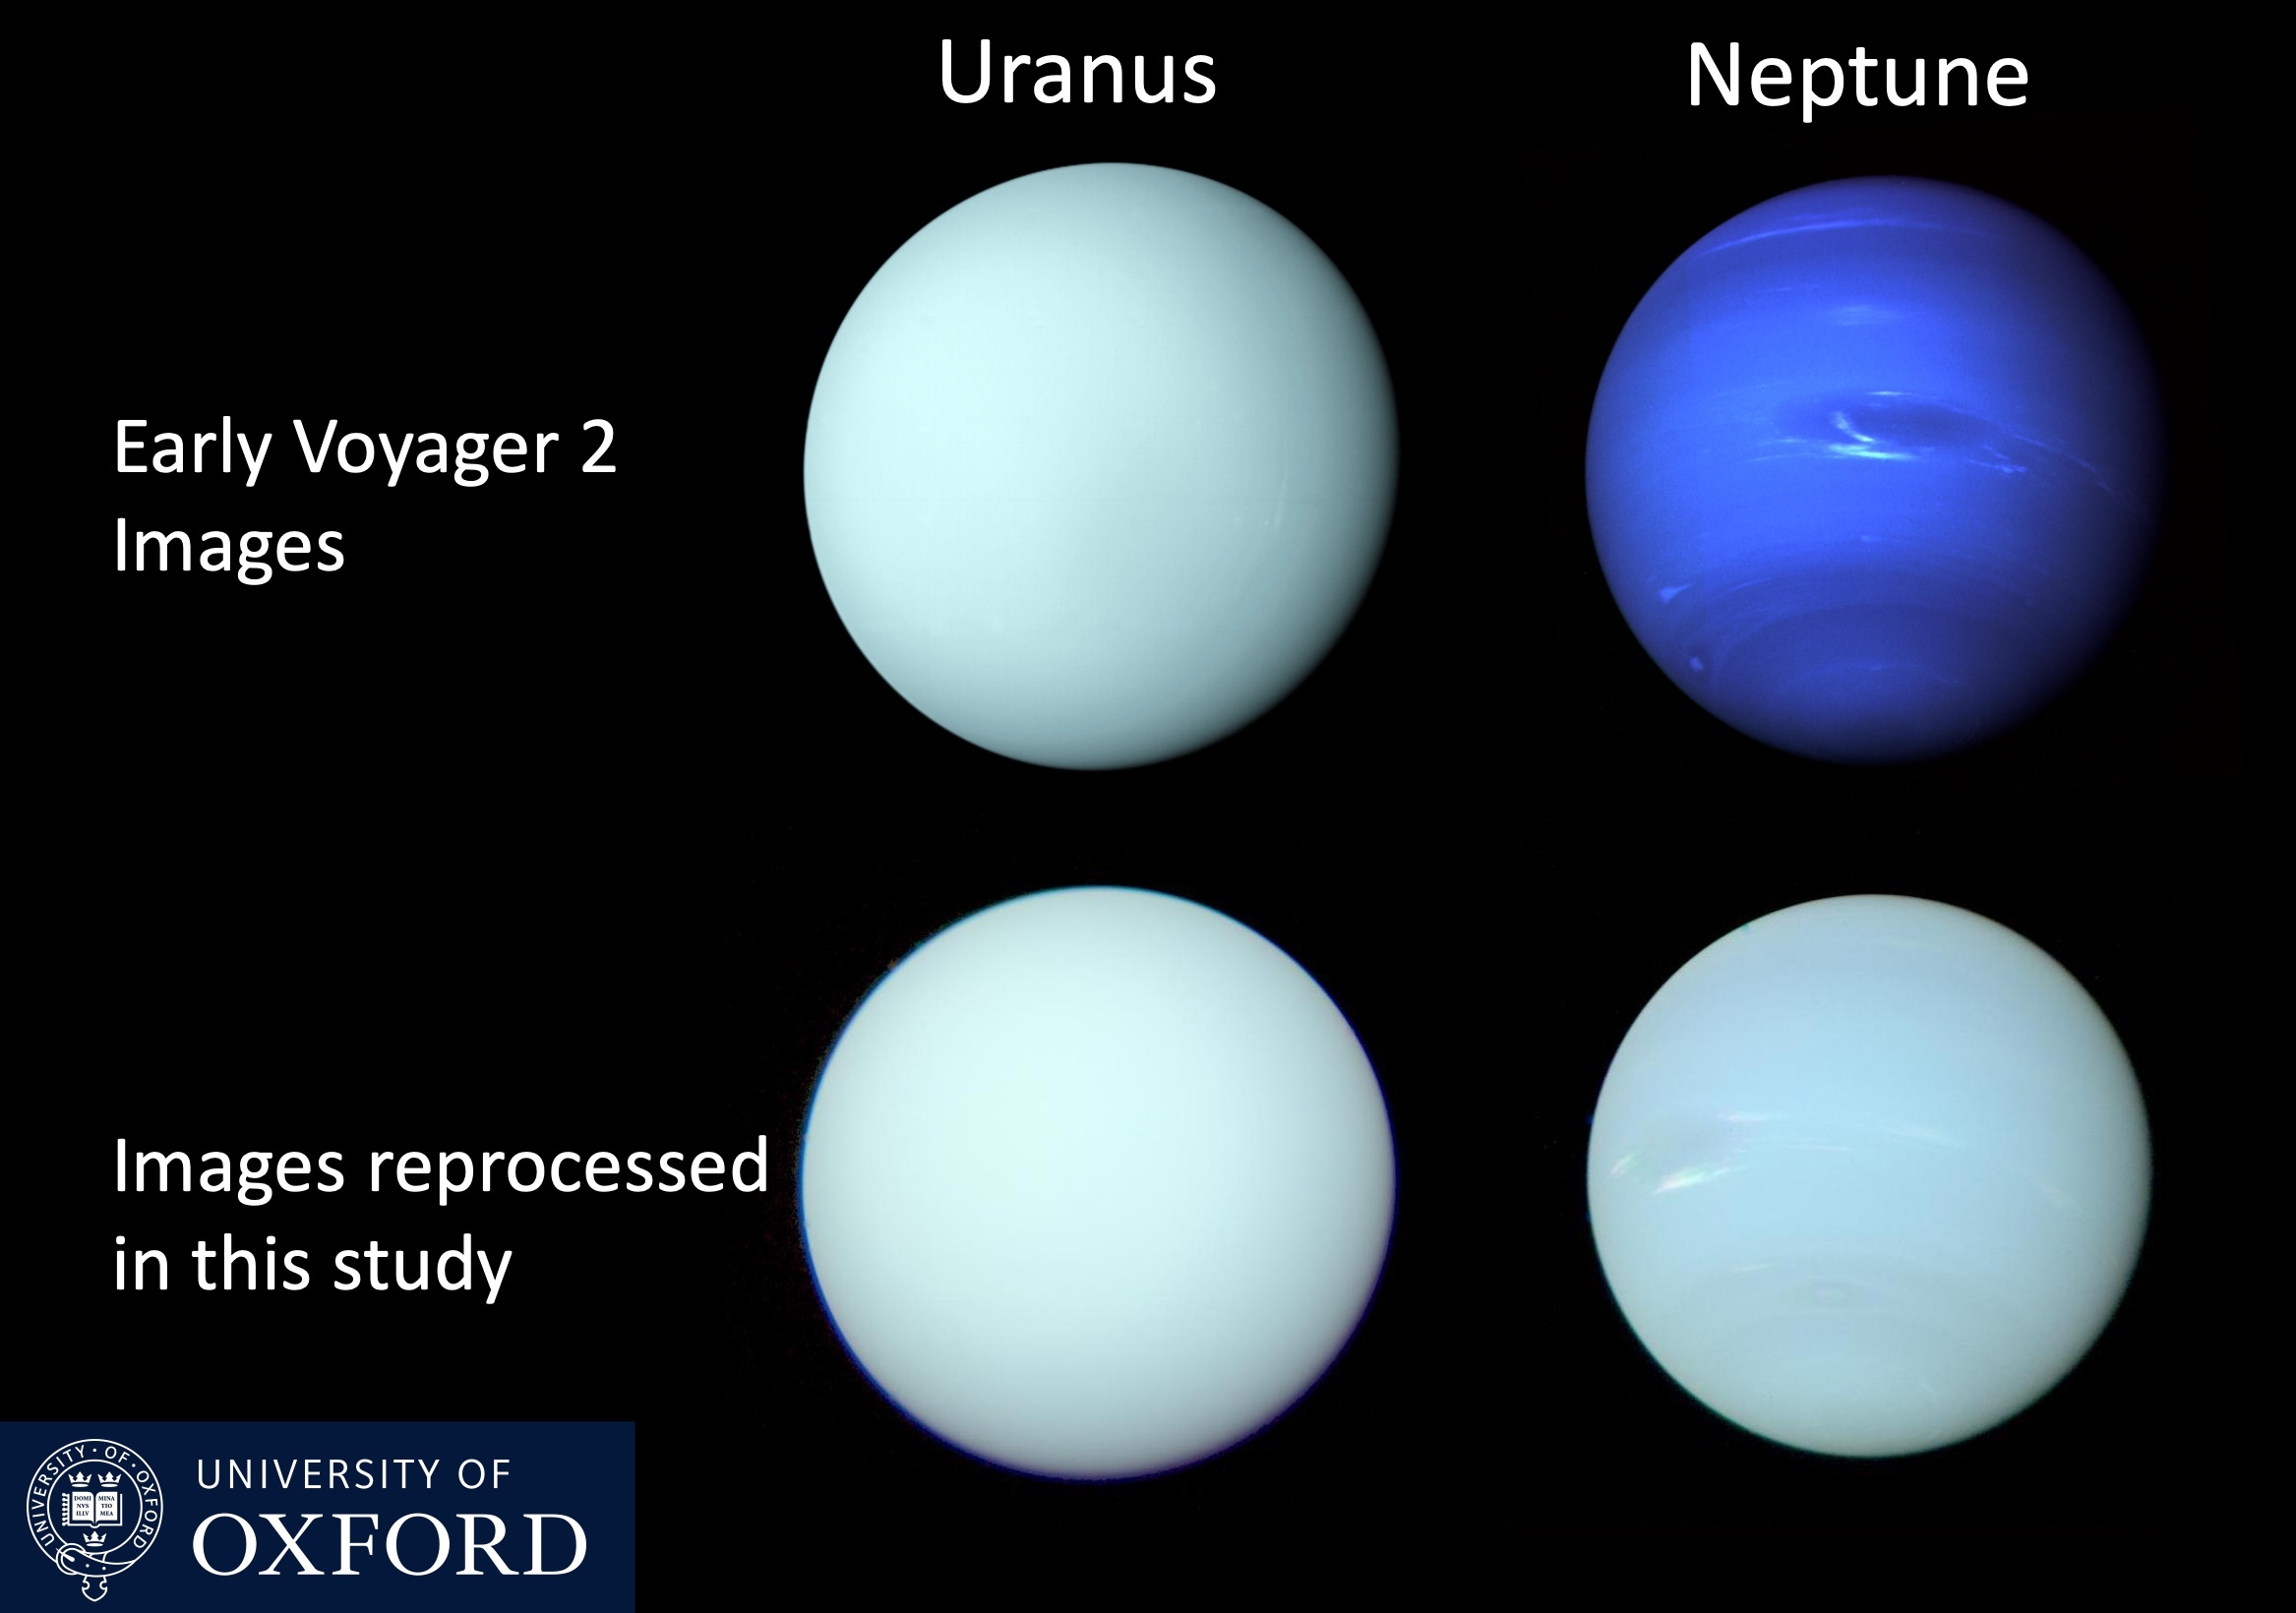 On the top are outdated views of Uranus and Neptune, with Uranus on the left in pale blue and Neptune on the right in a deep azure. On the bottom are the two side-by-side new views of the planets. They both are pale blue.